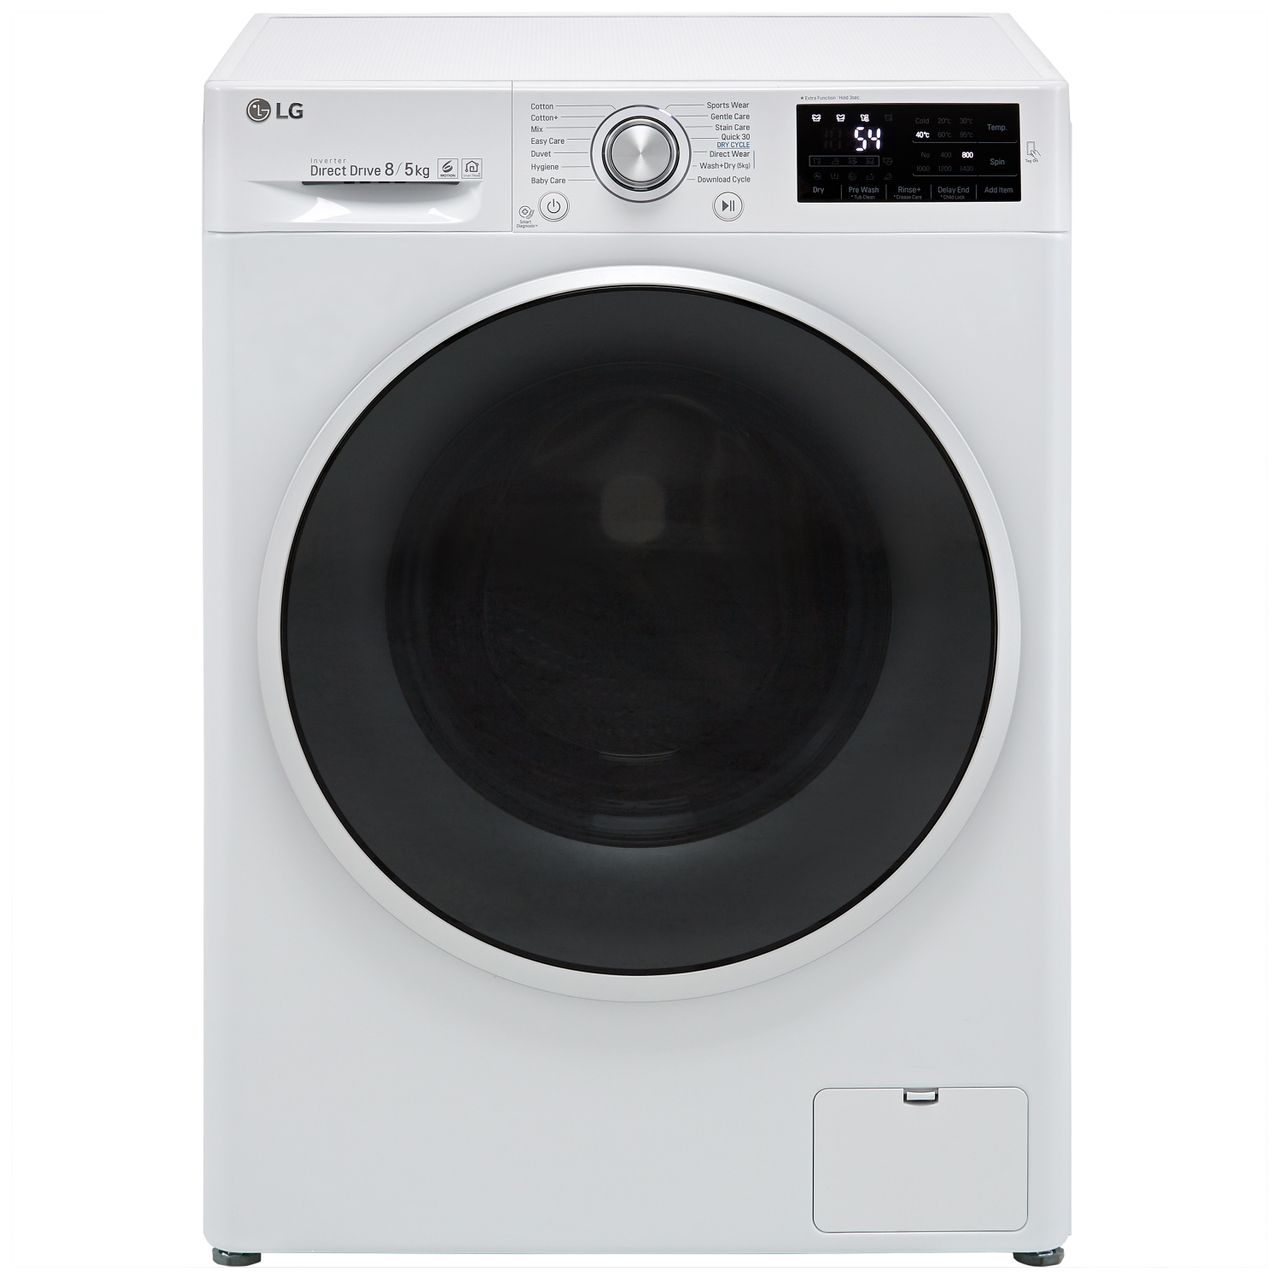 LG J6 FWJ685WN 8Kg / 5Kg Washer Dryer with 1400 rpm Review